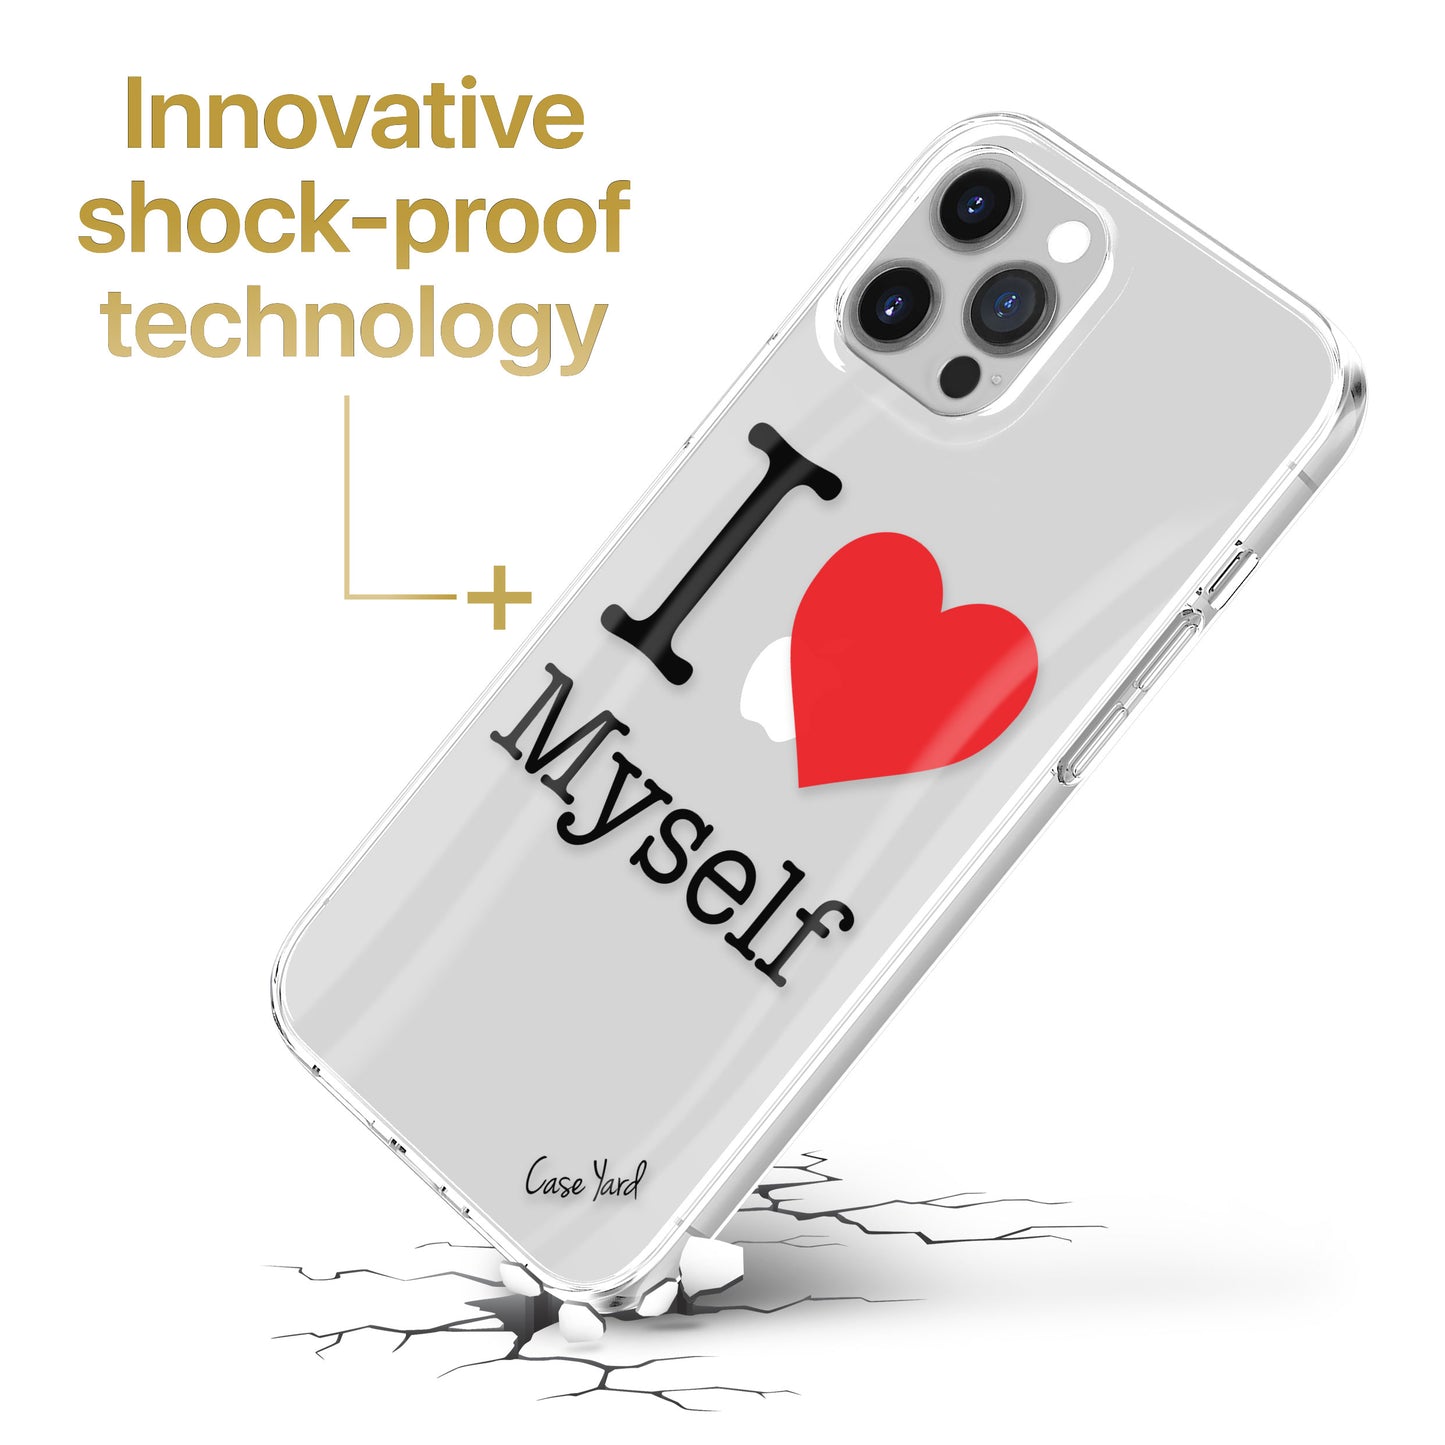 TPU Clear case with (I Love My Self) Design for iPhone & Samsung Phones